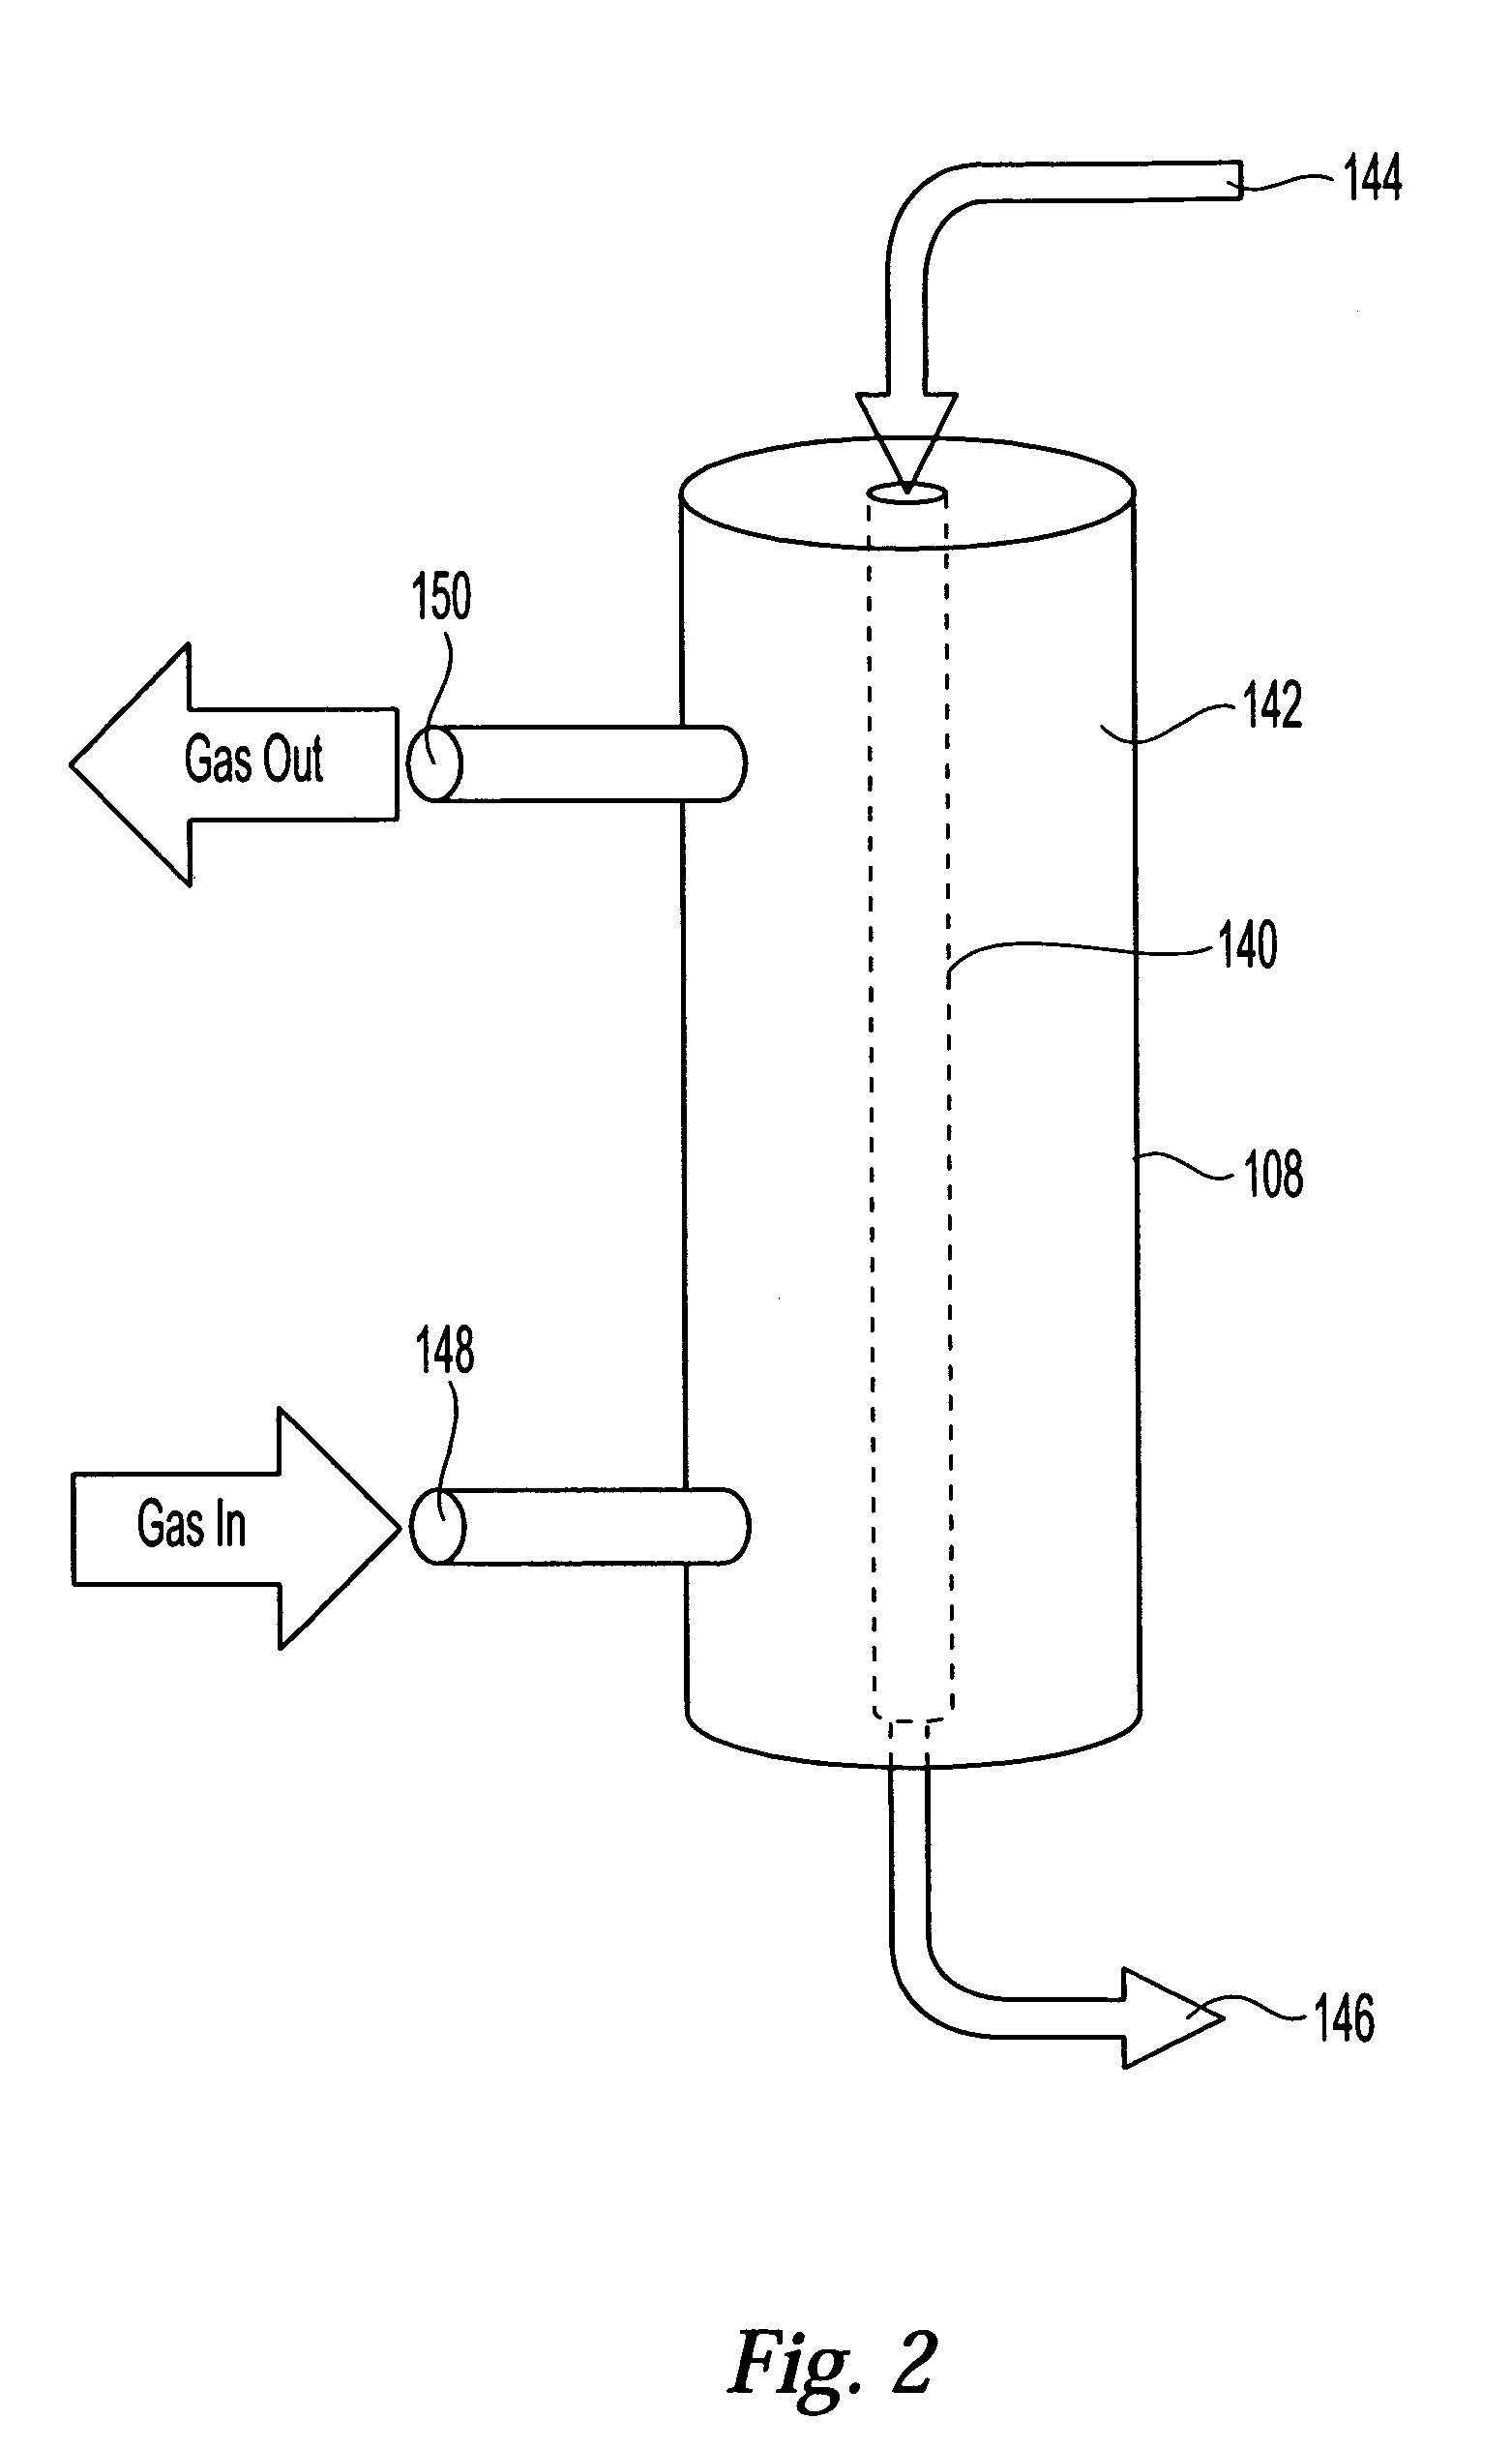 Method and apparatus for measuring nitric oxide production and oxygen consumption in cultures of adherent cells